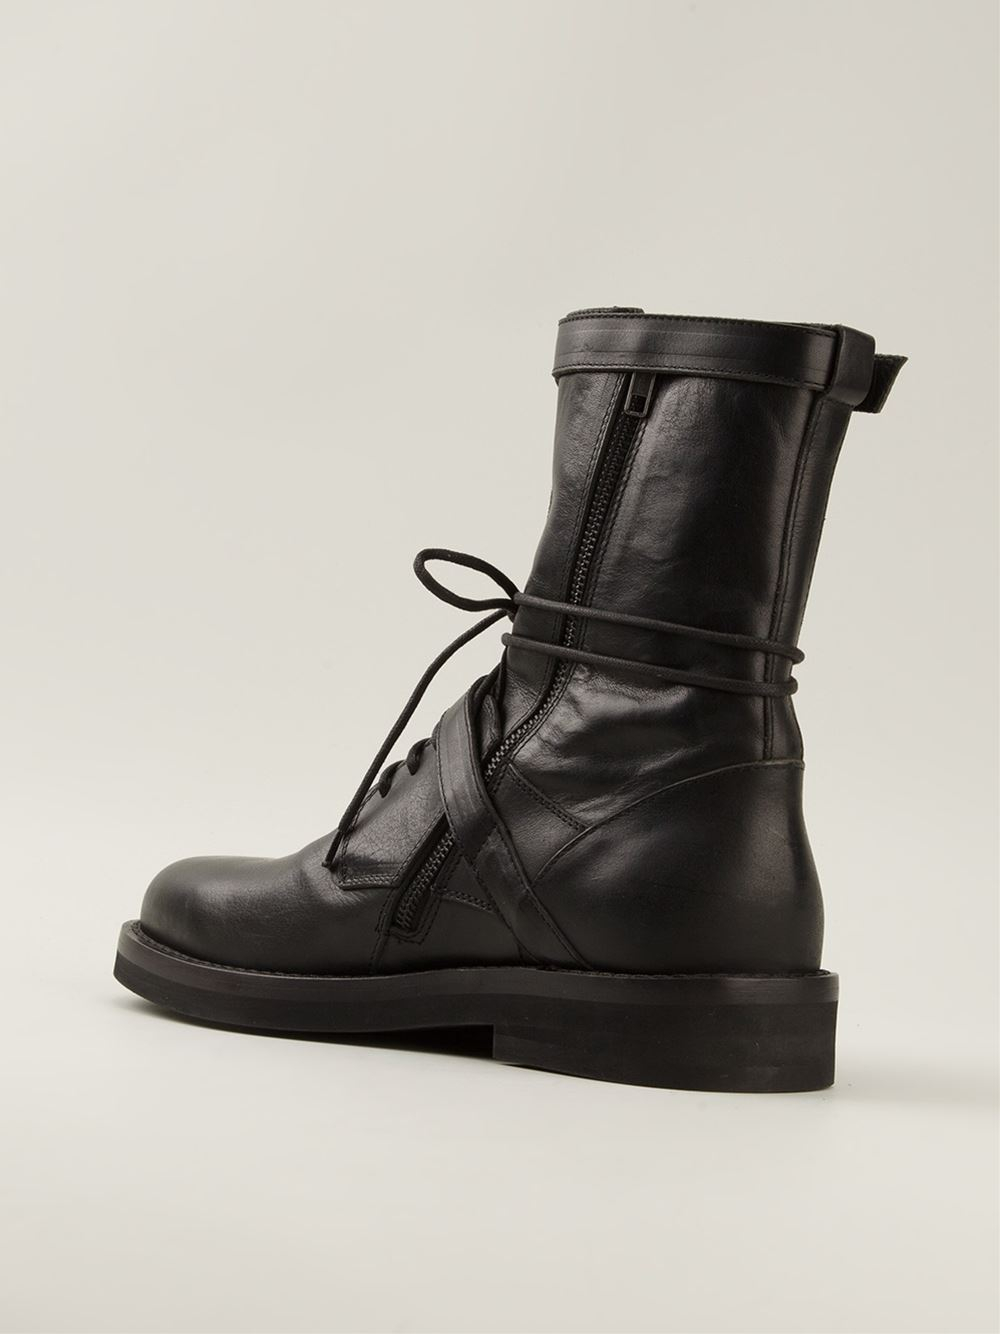 Lyst - Ann Demeulemeester Olio Military Boots in Black for Men